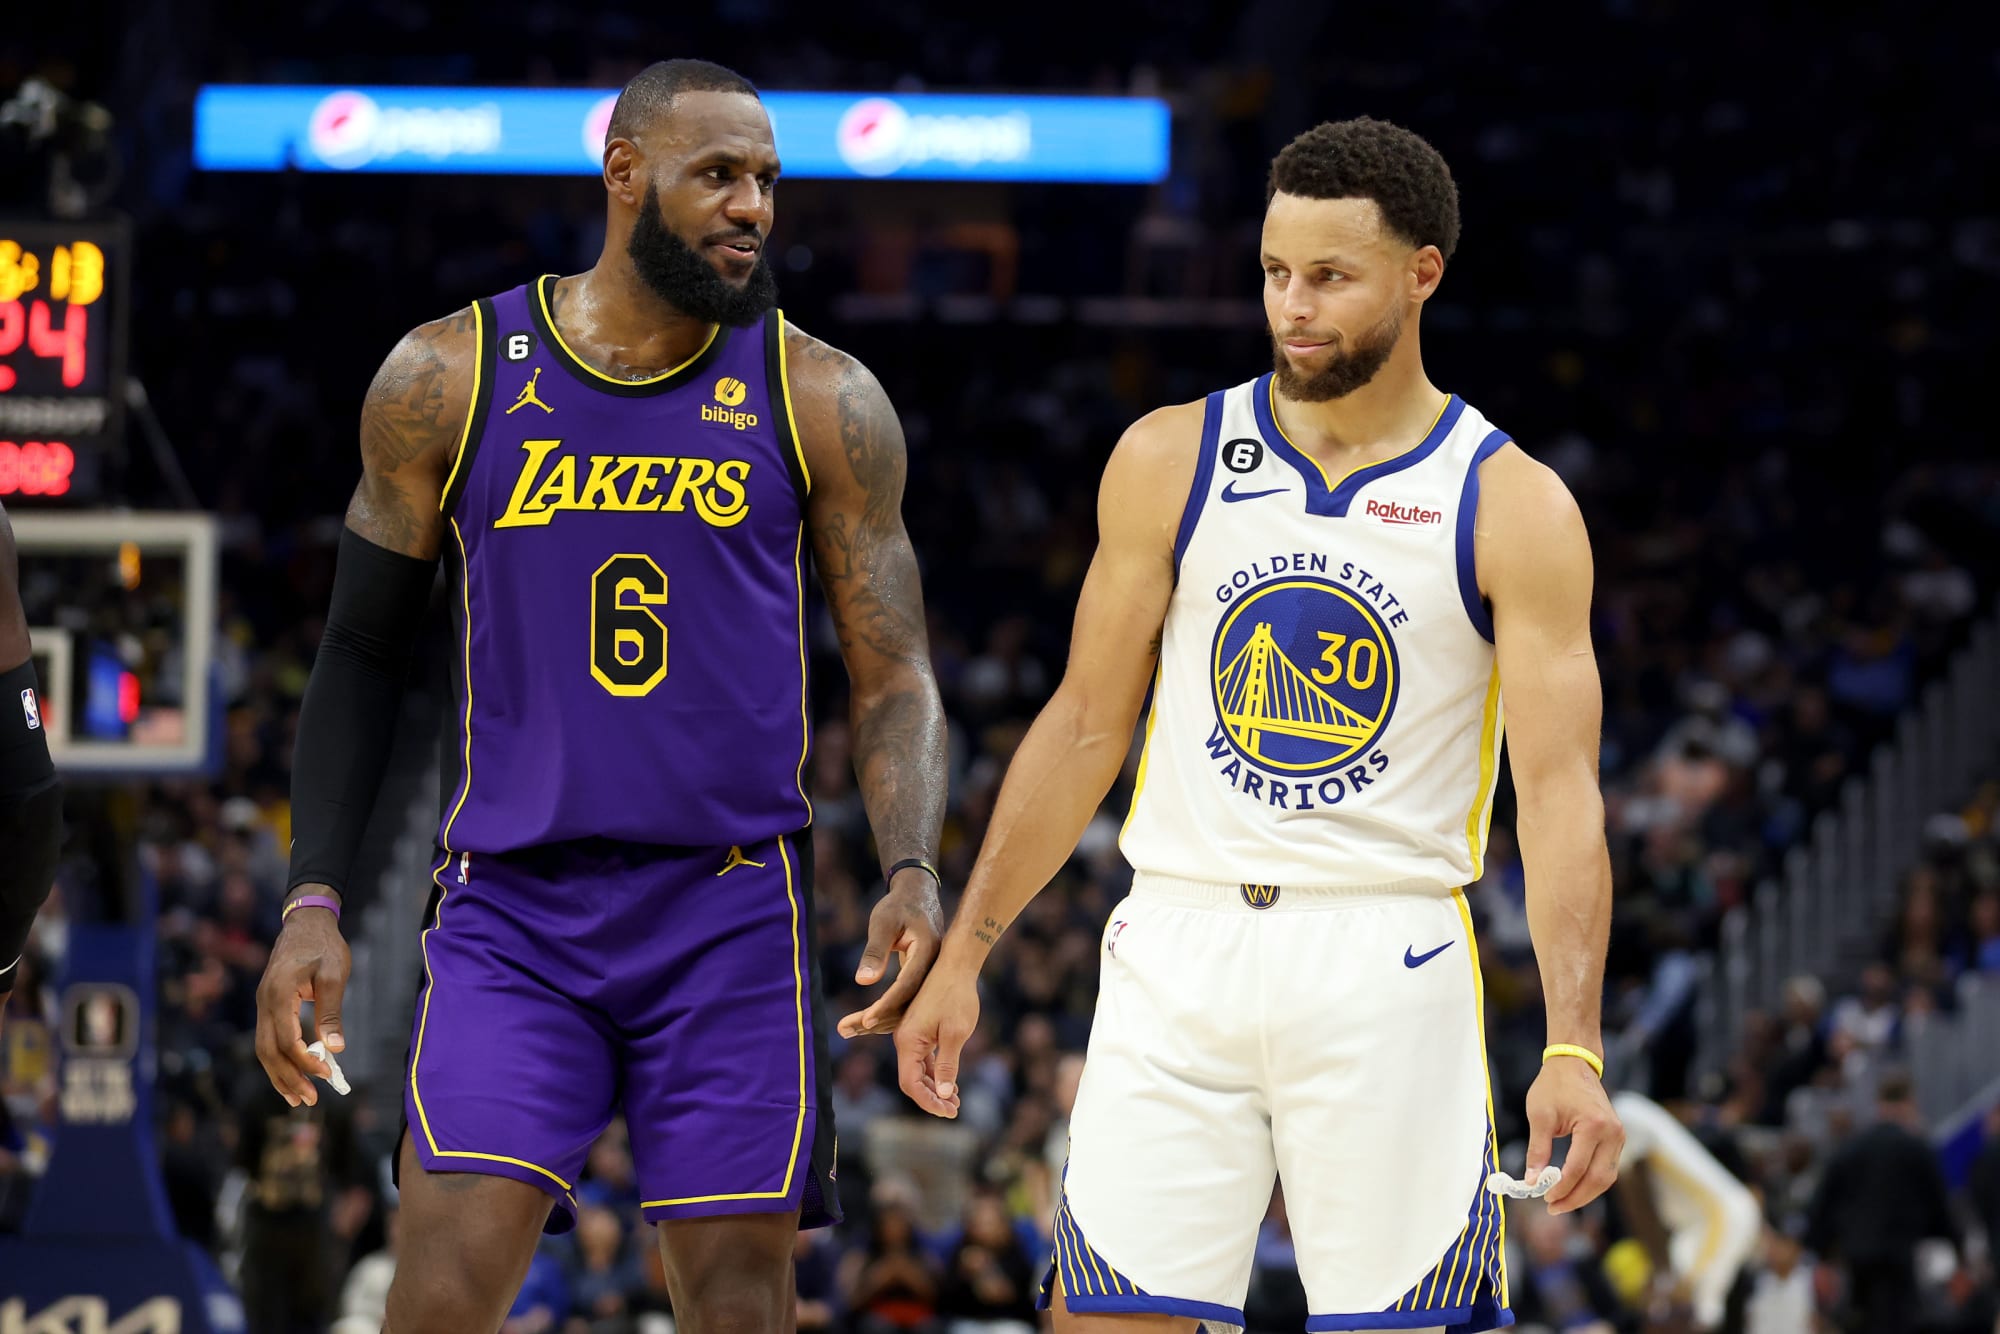 Stephen Curry and Golden State Warriors remain NBA’s biggest drawcard